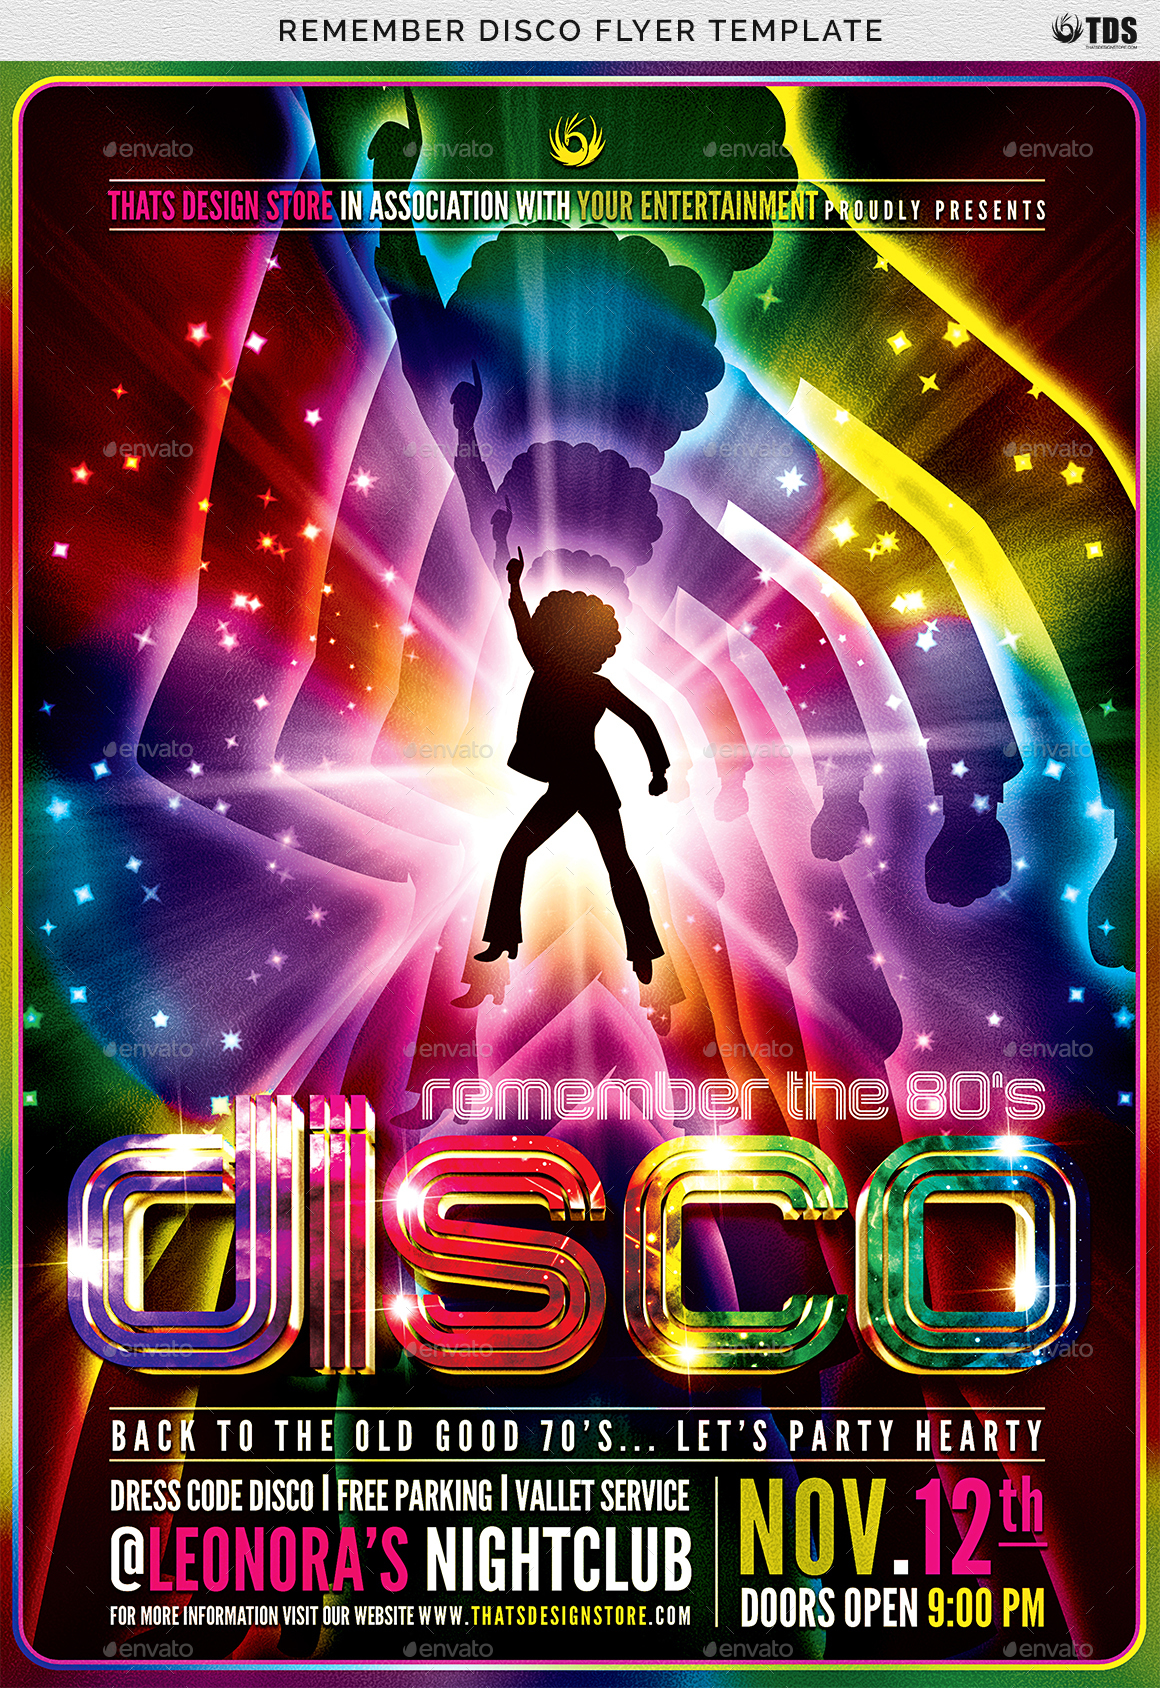 Remember Disco Flyer Template By Lou606